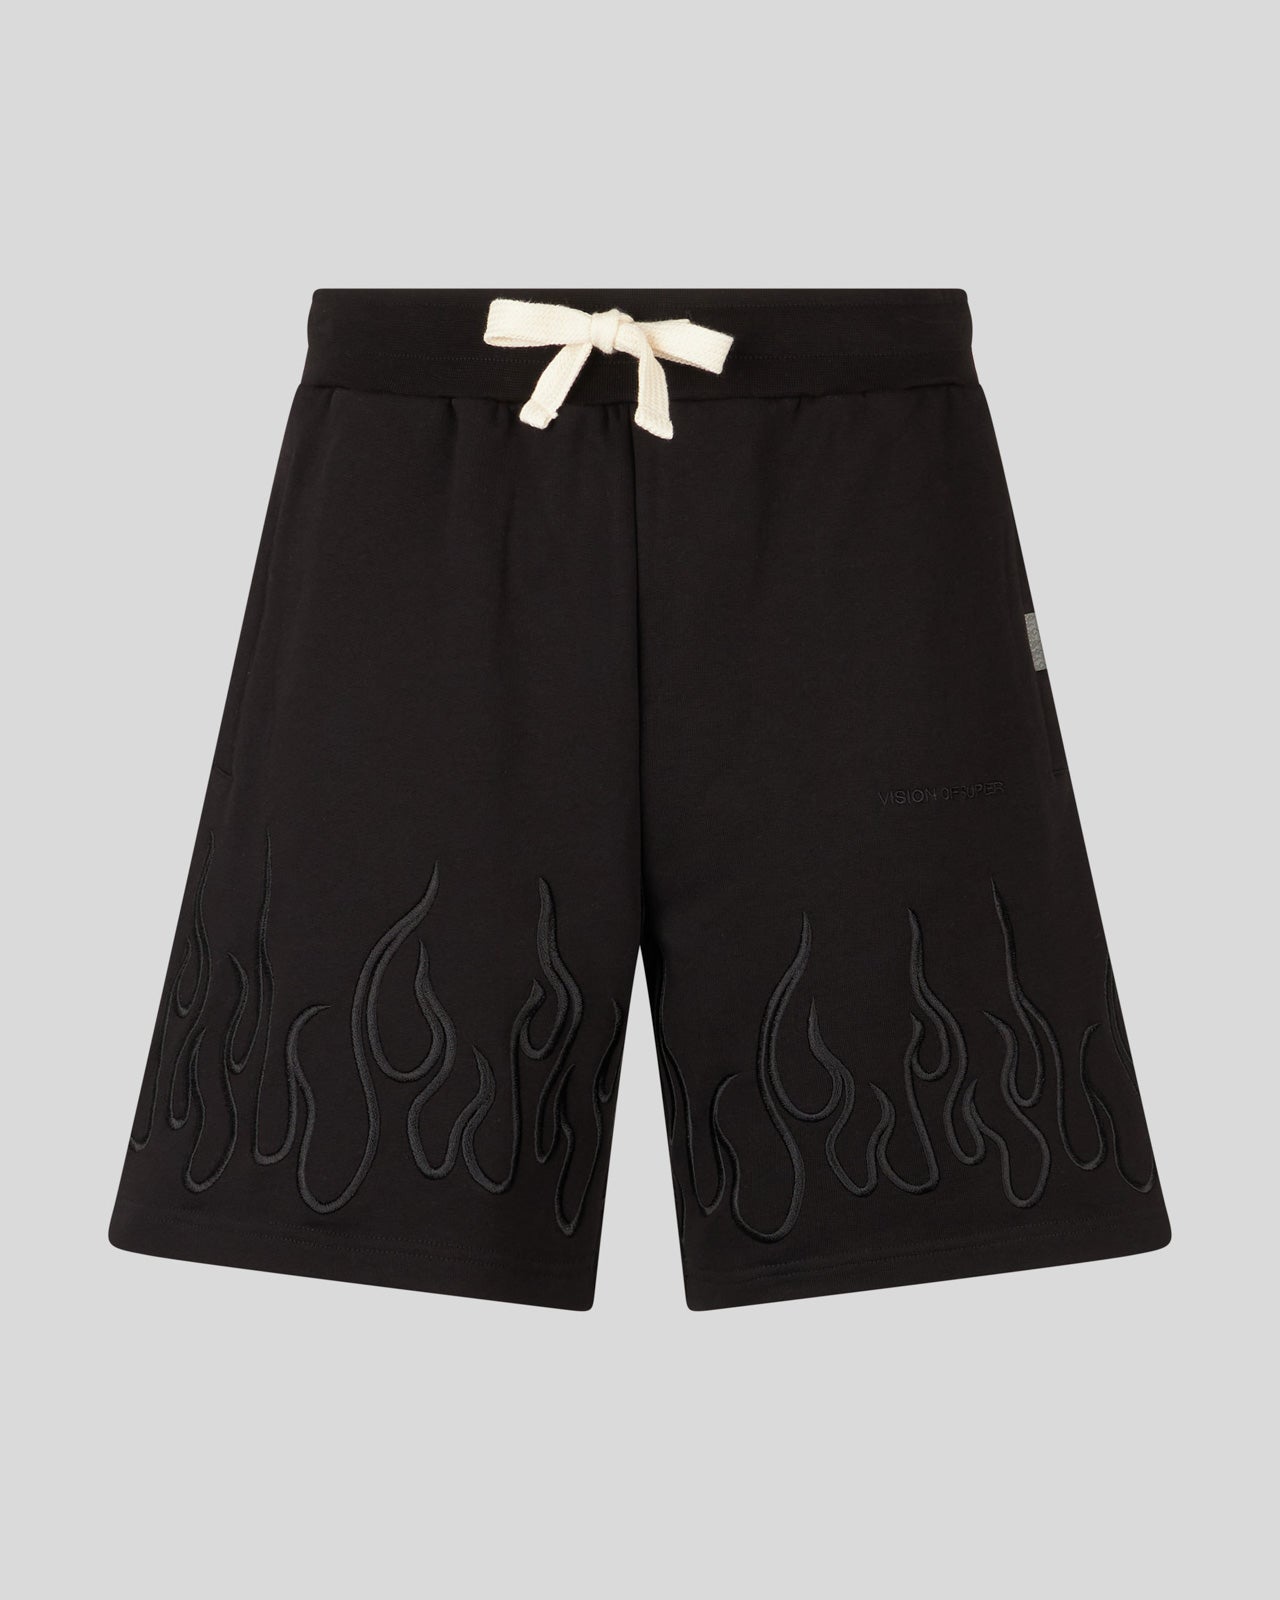 BLACK SHORTS WITH EMBROIDERED BLACK FLAMES